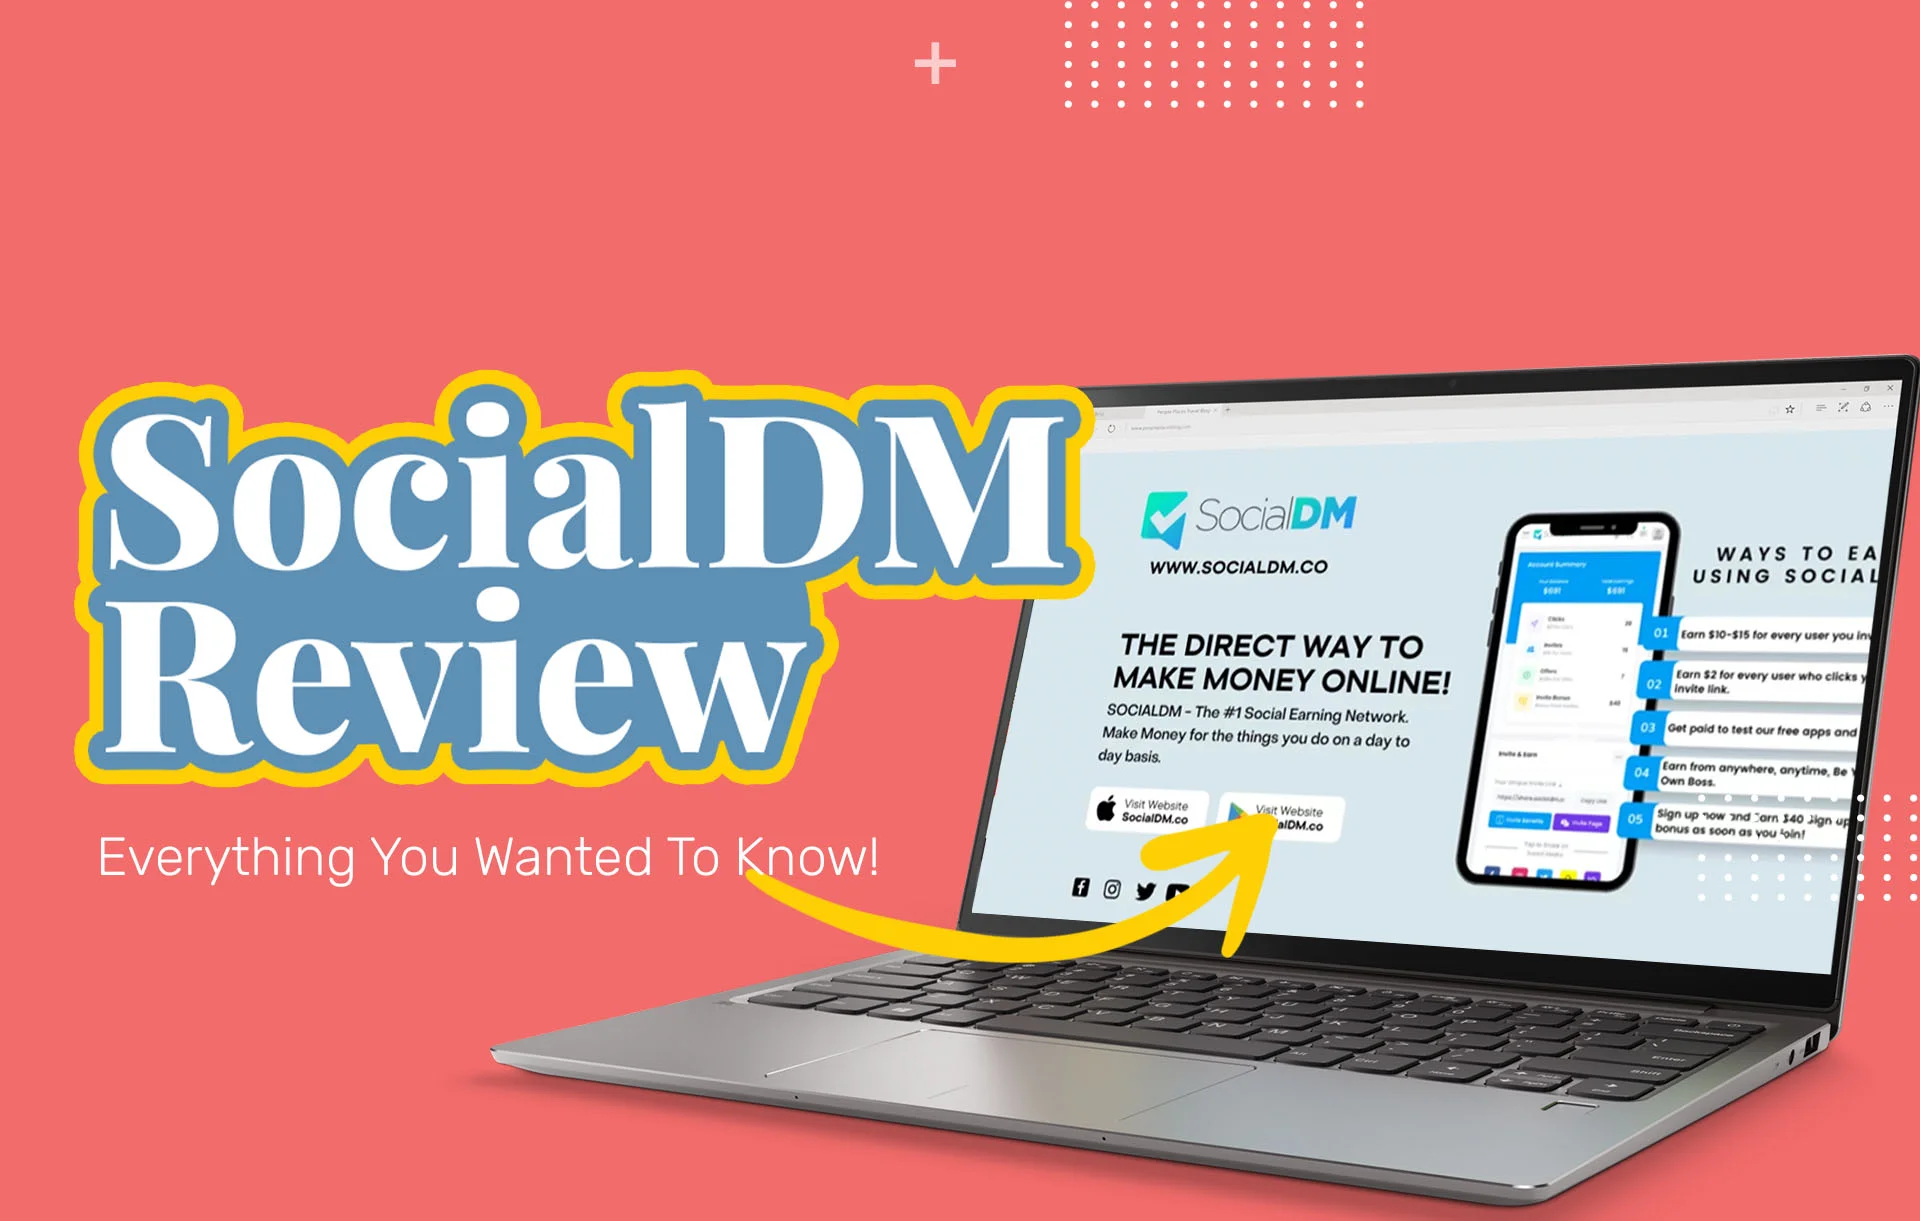 SocialDM Reviews: Everything You Wanted To Know!